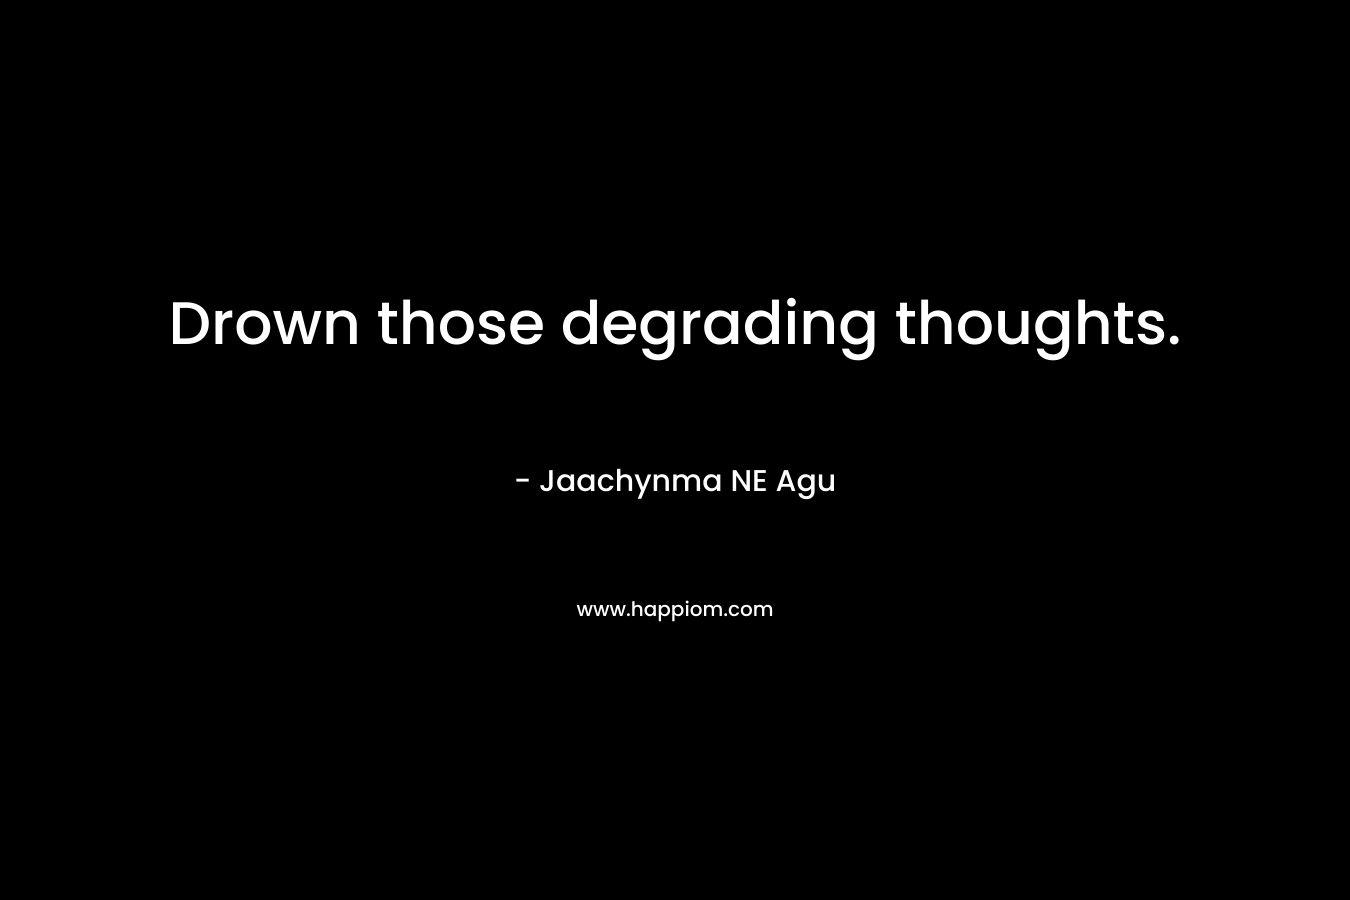 Drown those degrading thoughts.